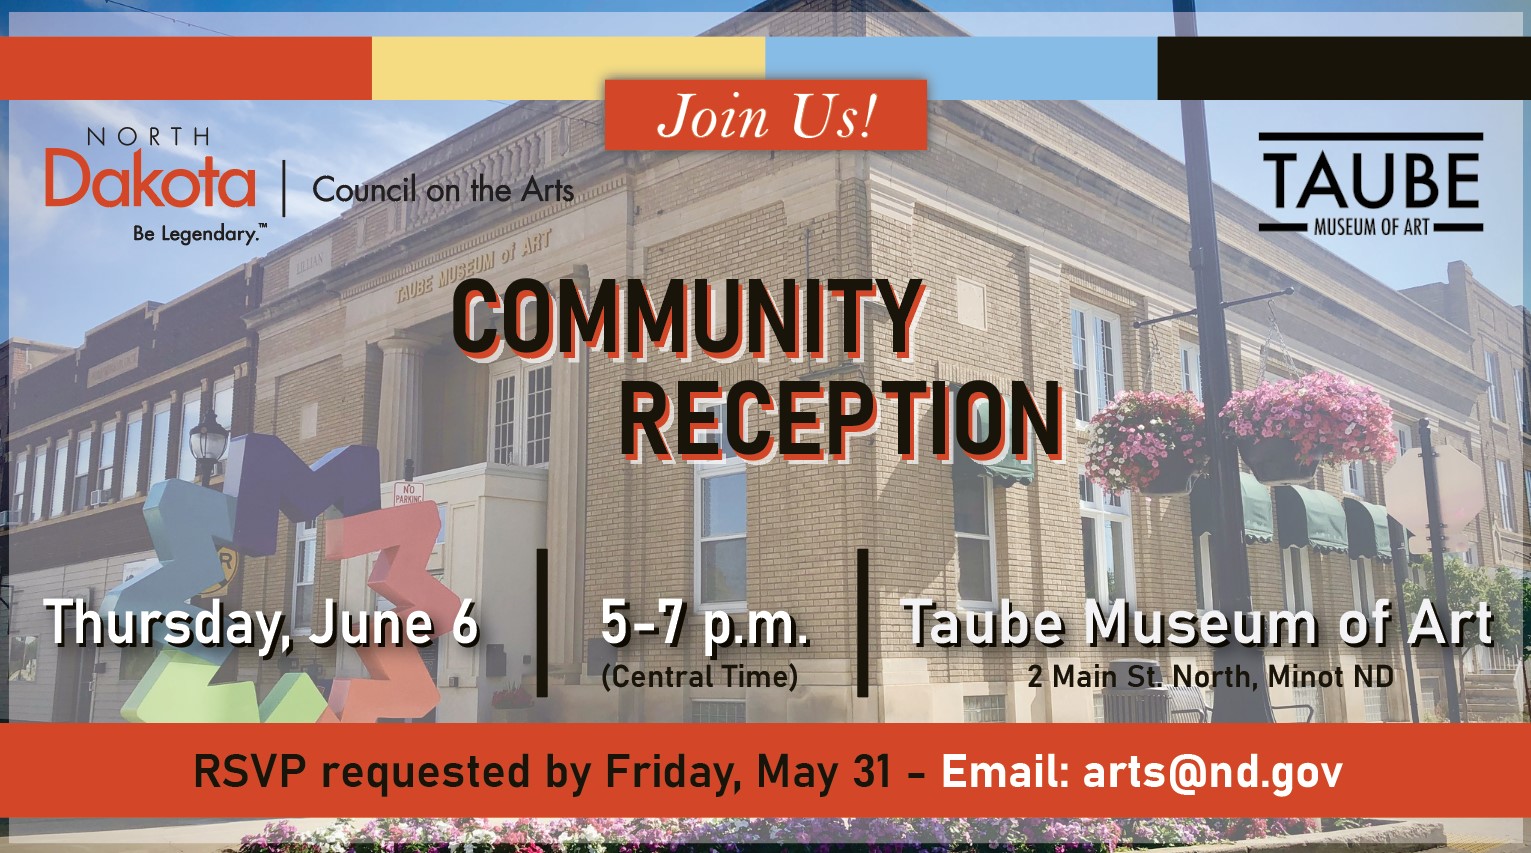 North Dakota Council on the Arts invites everyone to join us at a Community Reception at Taube Museum of Art, located at 2 Main St. N in Minot, ND on Thursday, June 6 from 5pm to 7pm Central Time. Please RSVP to arts@nd.gov by Friday, May 31.